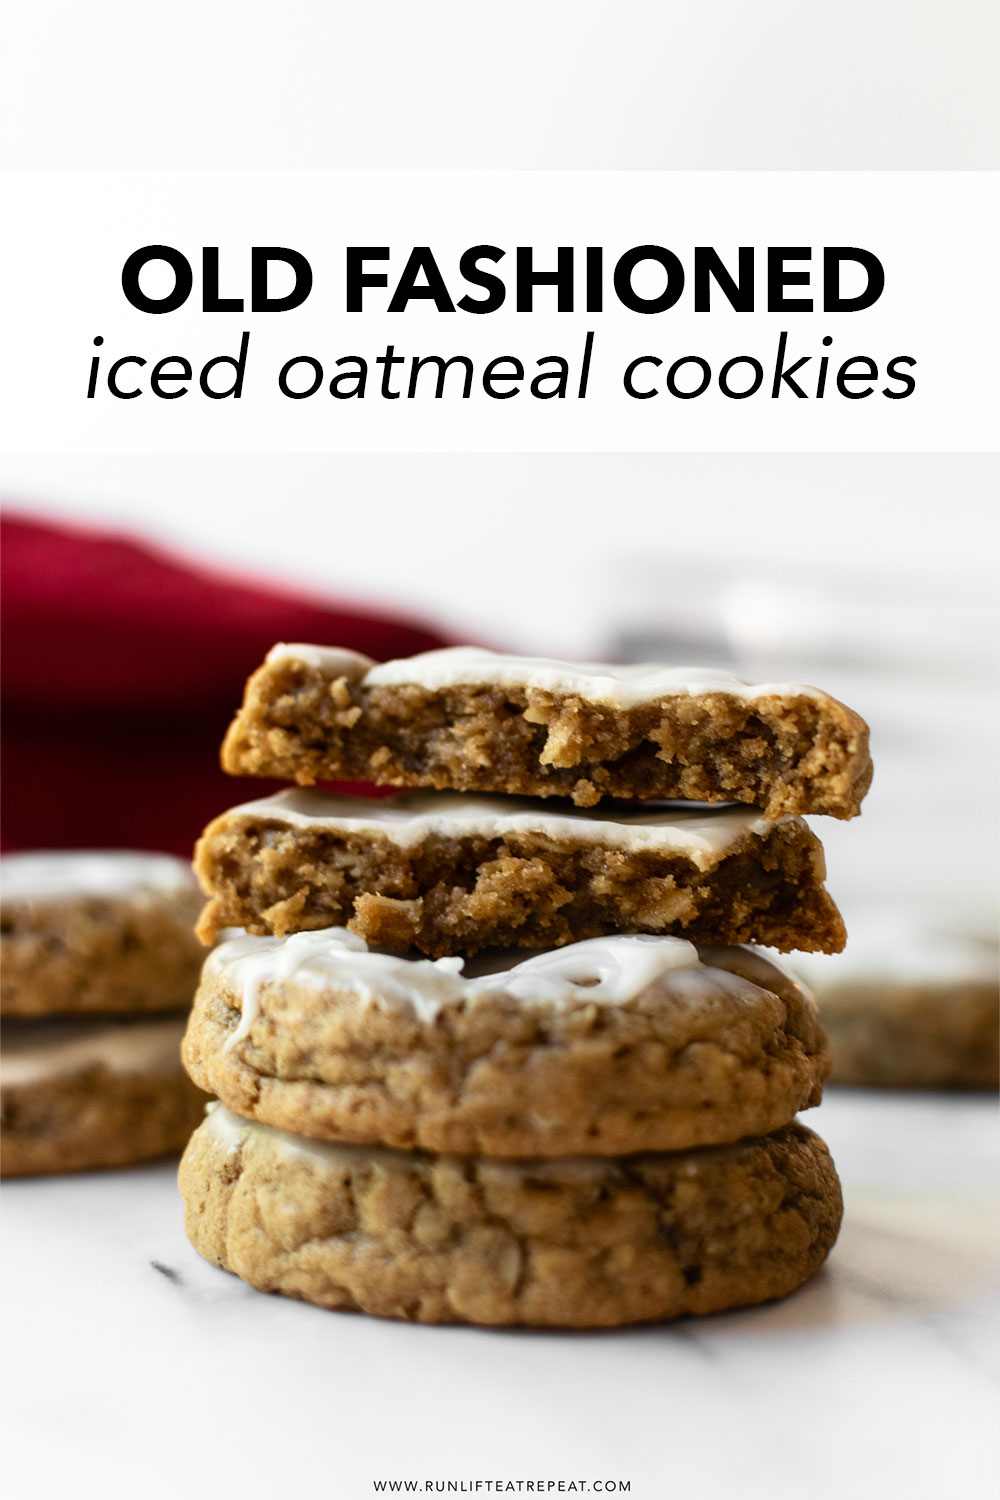 These classic iced oatmeal cookies are the old-fashioned style that you know and love from your childhood. With soft centers, crisp chewy edges, and topped with vanilla icing, these will be favorite for friends and family!